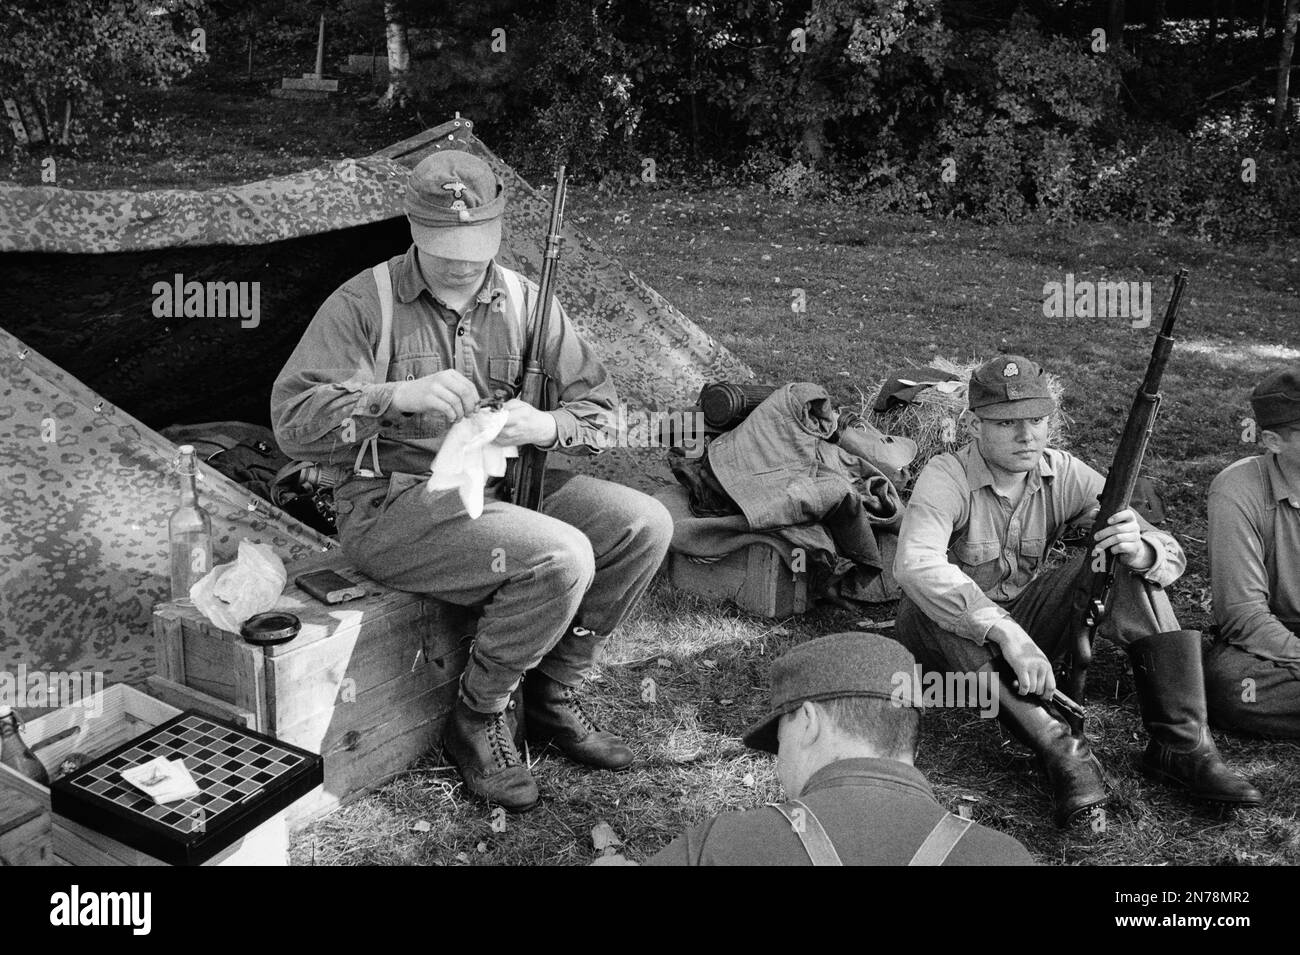 Young WWII German soldier sitting around a pup tent, one oiling his gun during a reenactment at the American Heritage Museum. The image was captured o Stock Photo